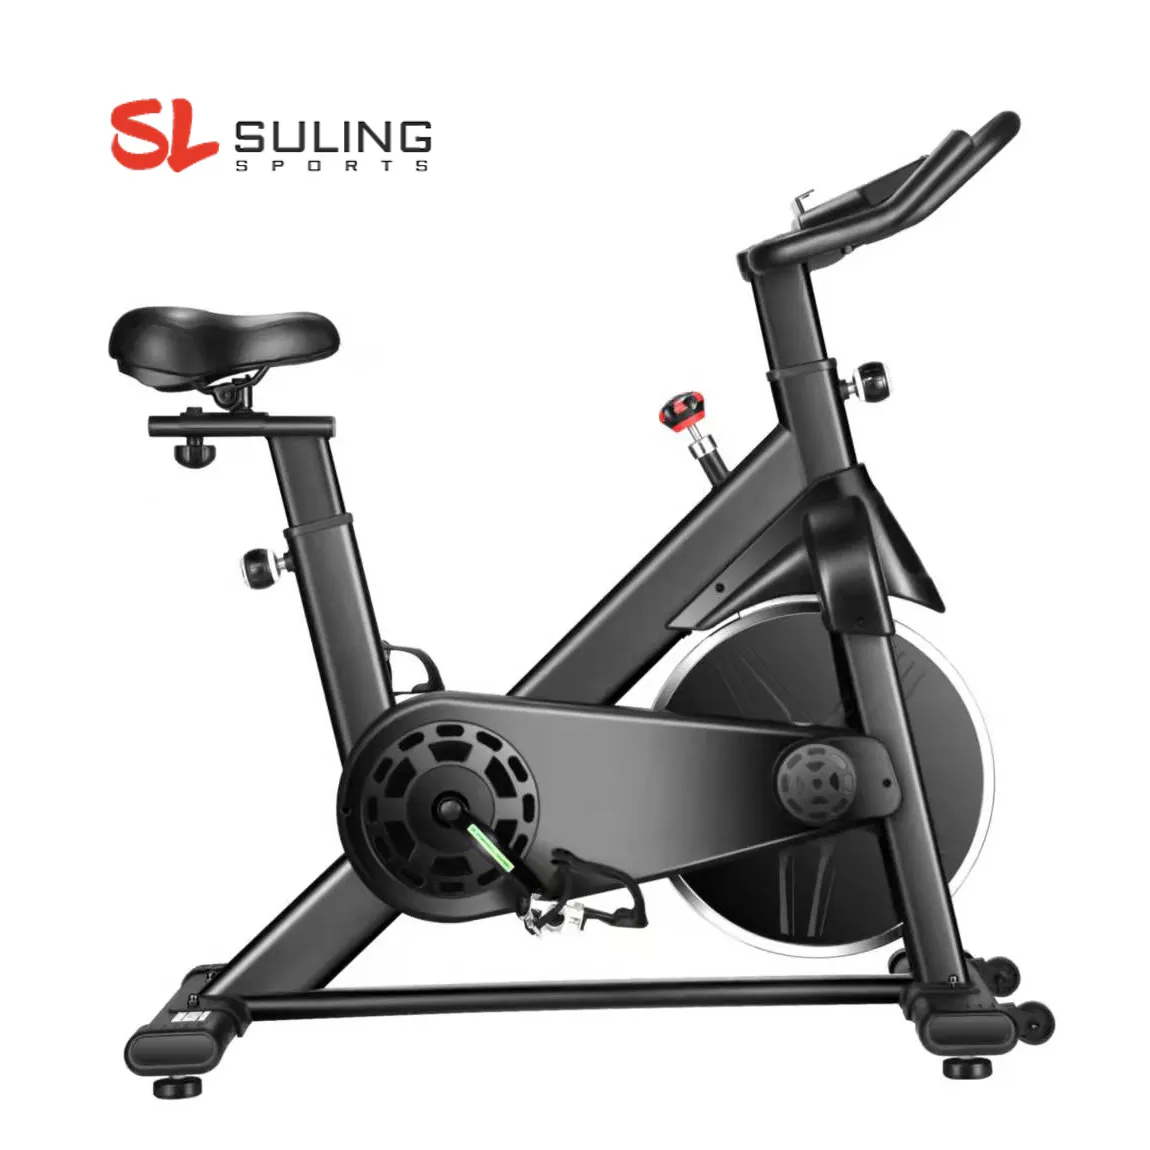 Professional indoor Stationary magnetic resistance spinning exercise fit cycle bikes with screen